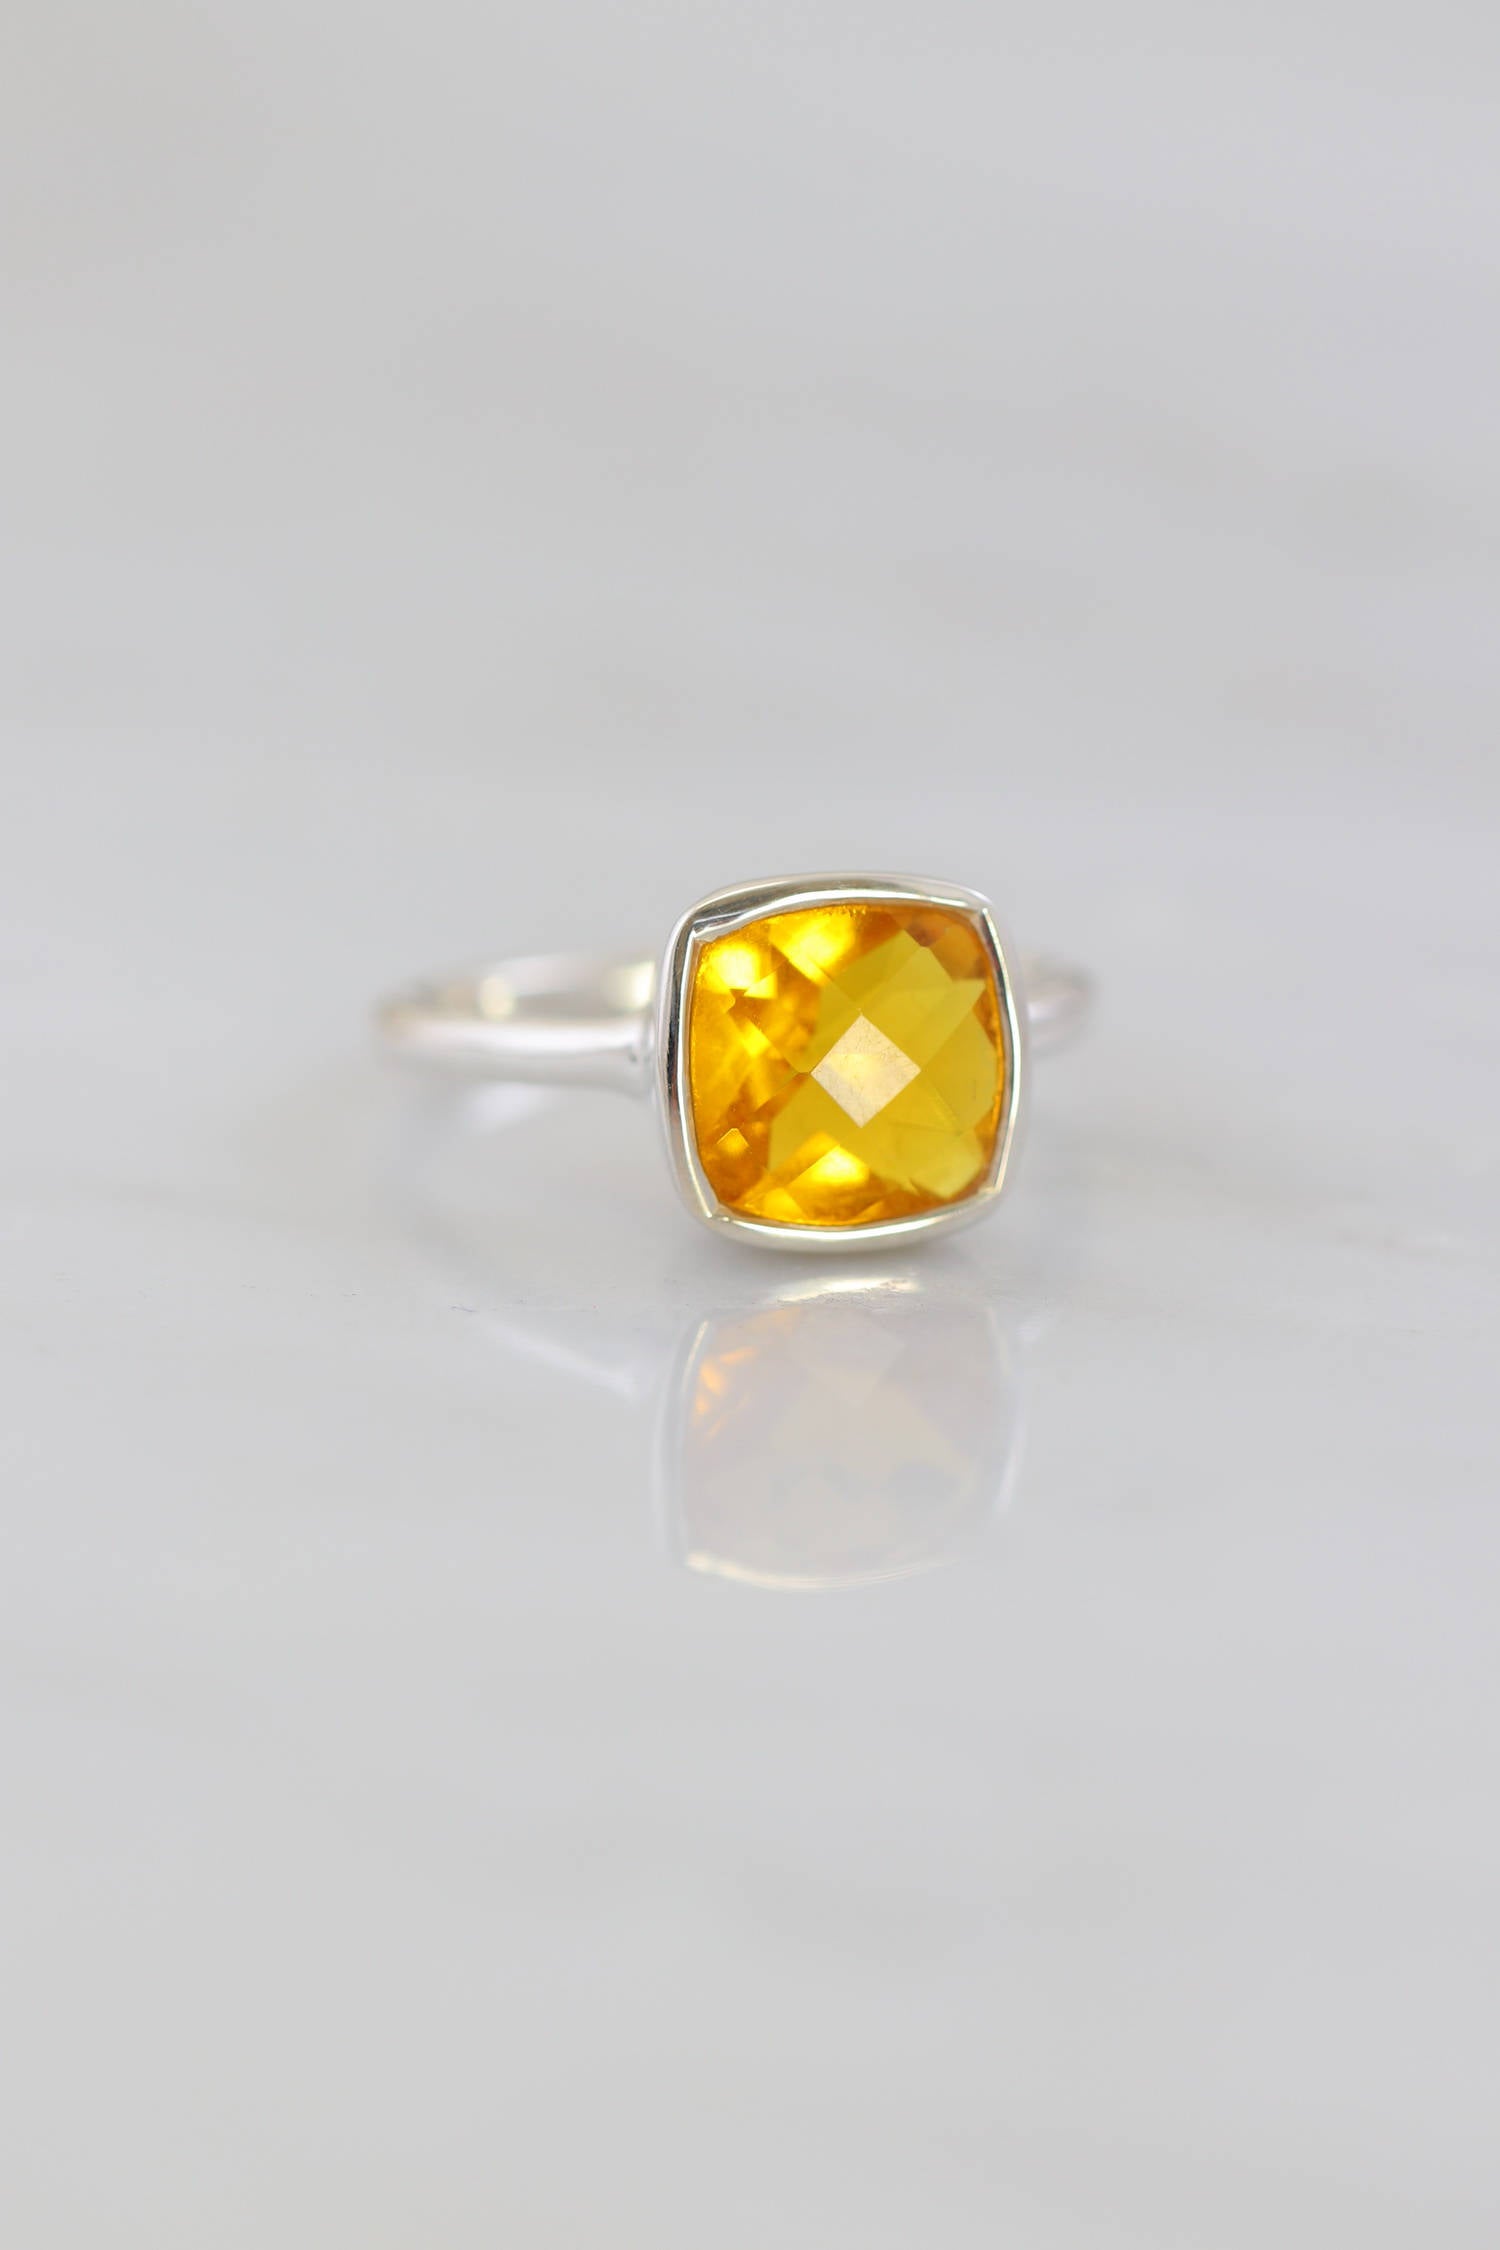 Sterling Silver Stackable ring, Citrine Ring, November Birthstone ring, Cushion Ring, Birthstone Ring, Silver Stacker ring, Gift for Her